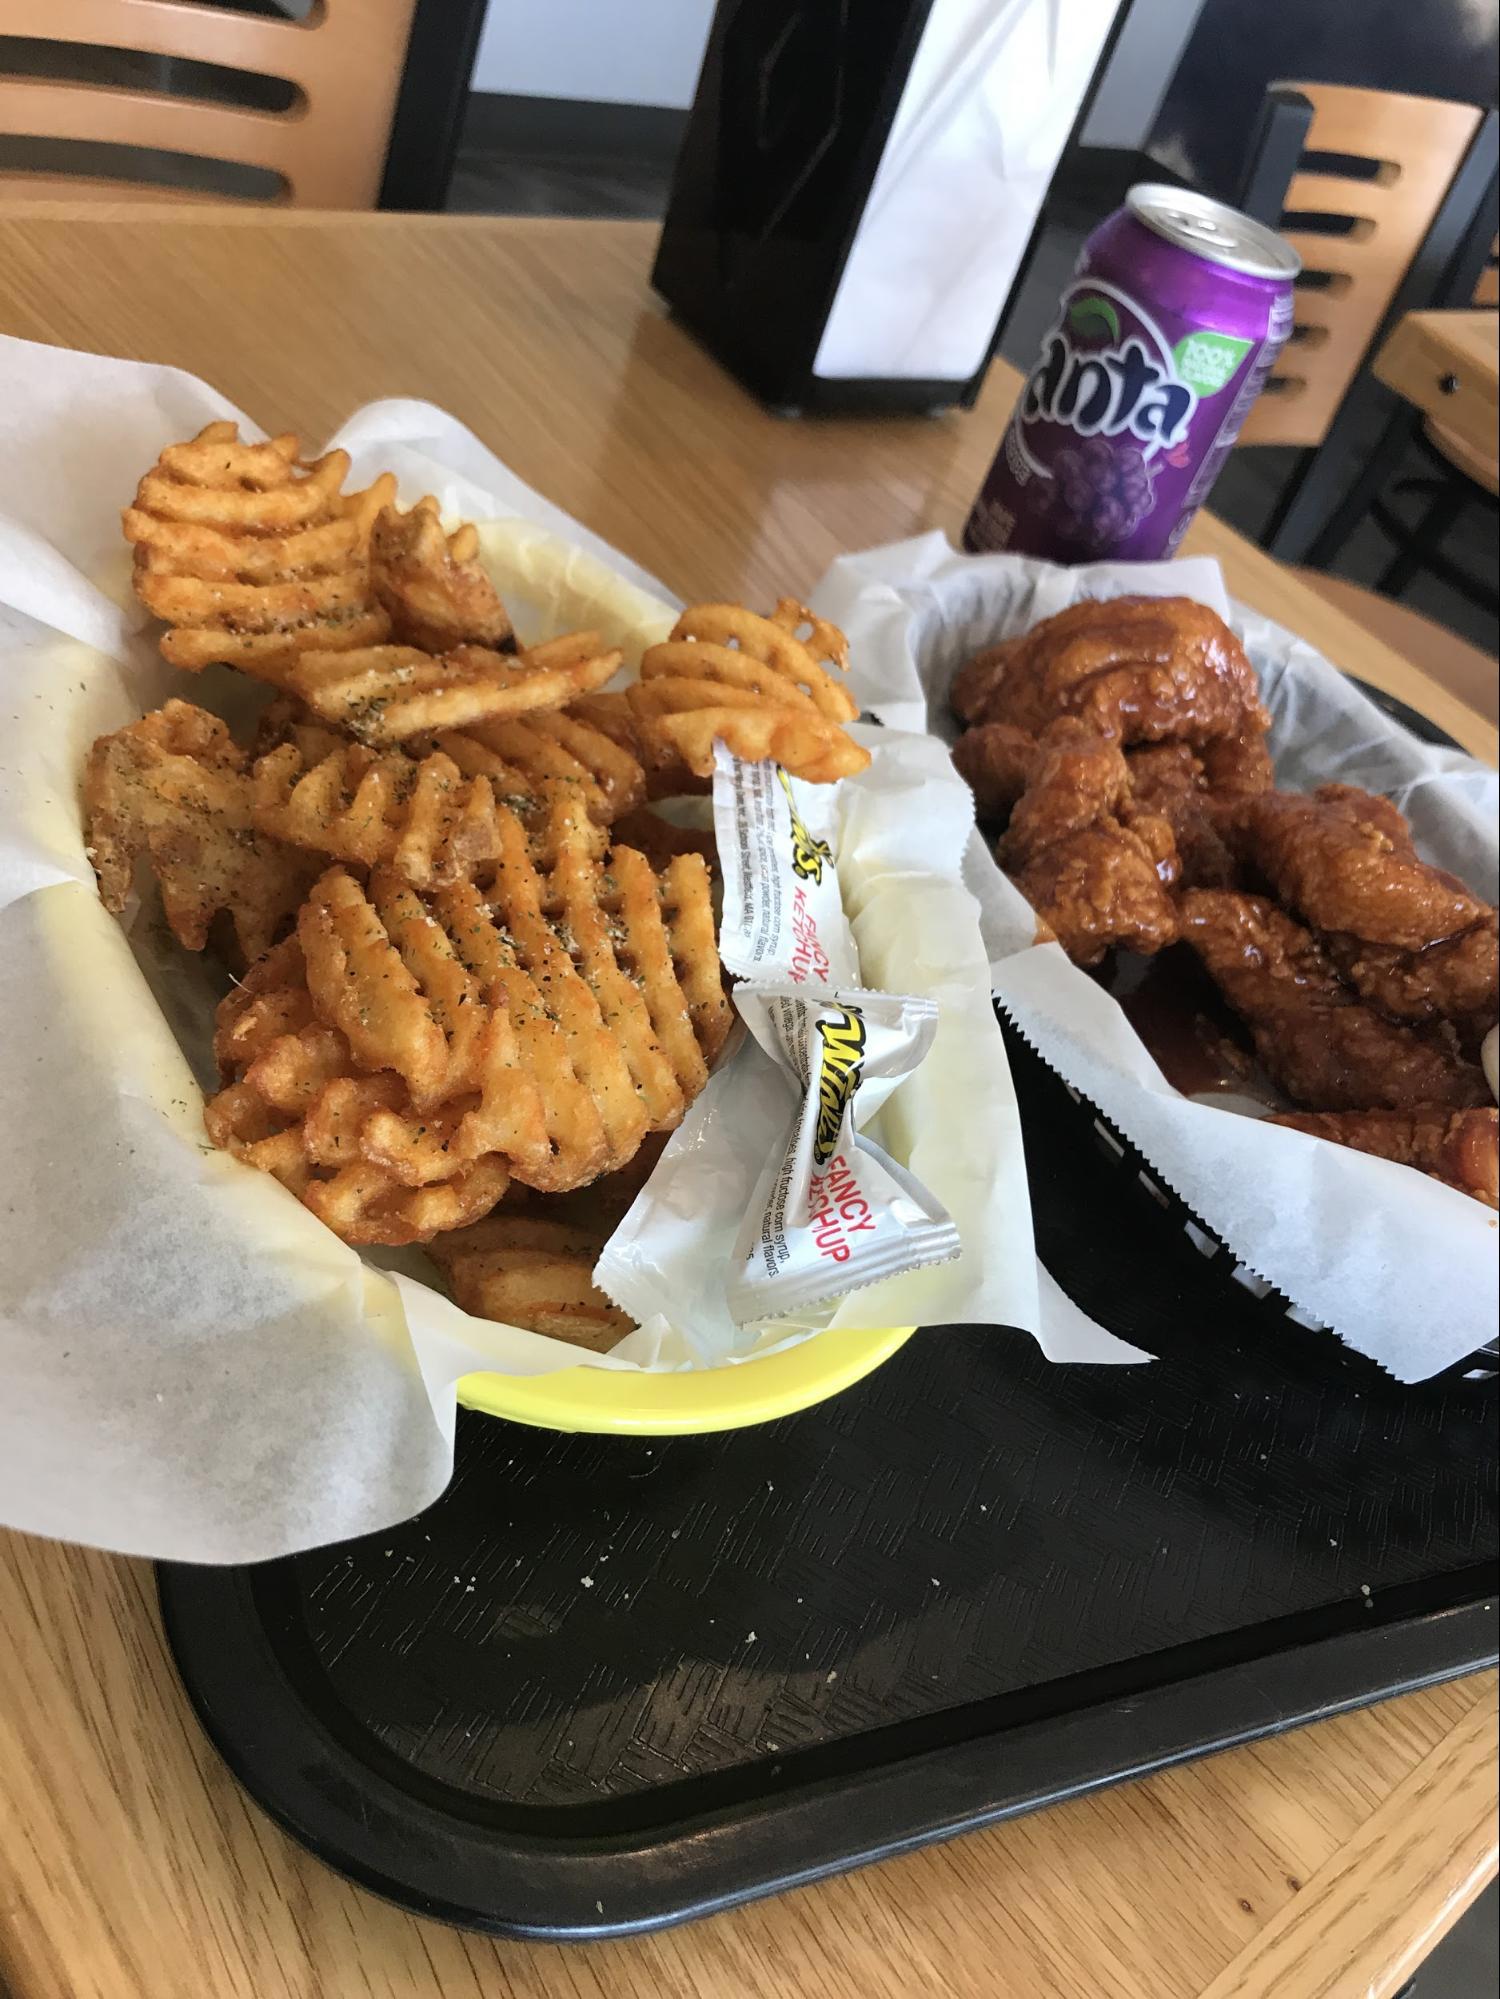 Tasty Tuesday - Wings Over Raleigh